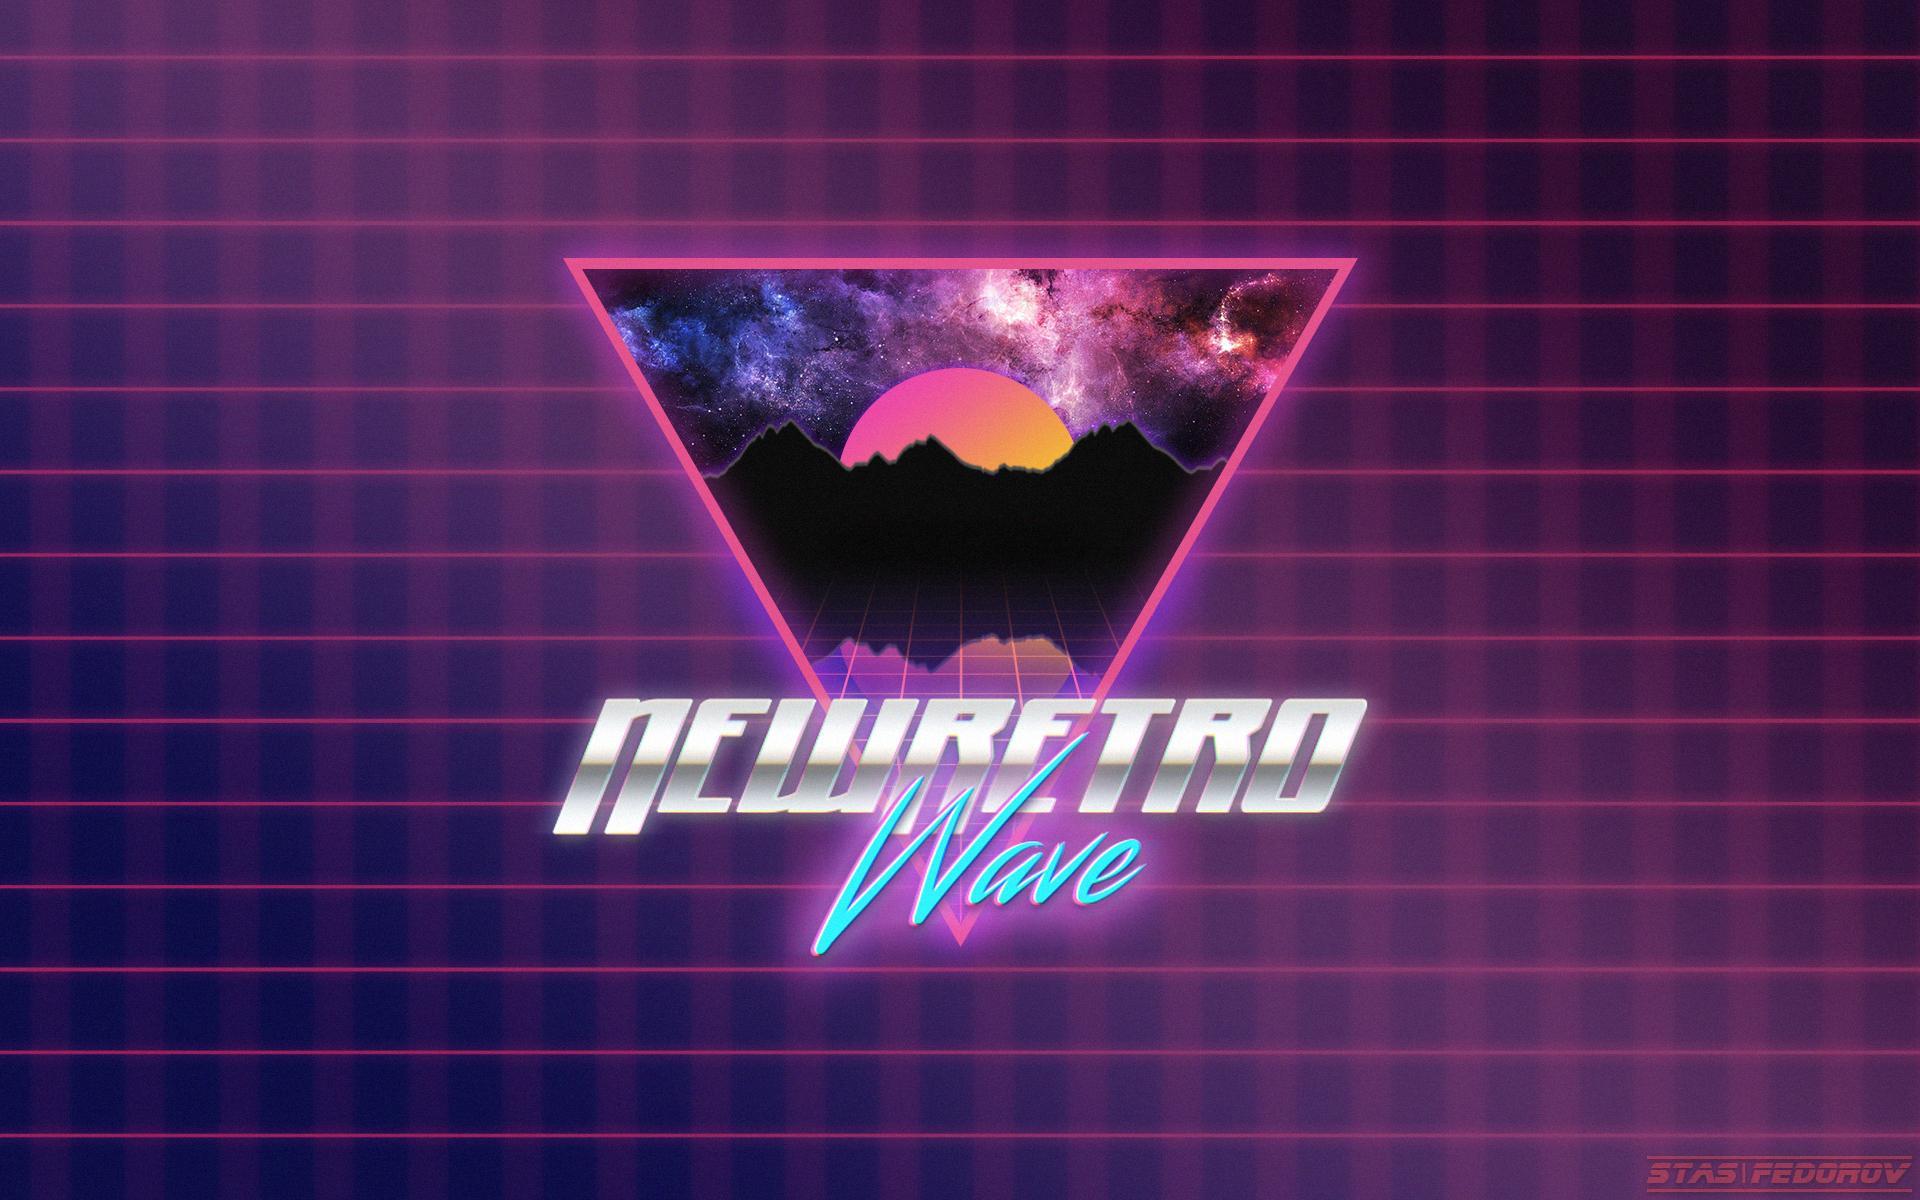 New Retro Wave, Synthwave, Neon, 1980s, Texture, Illustration